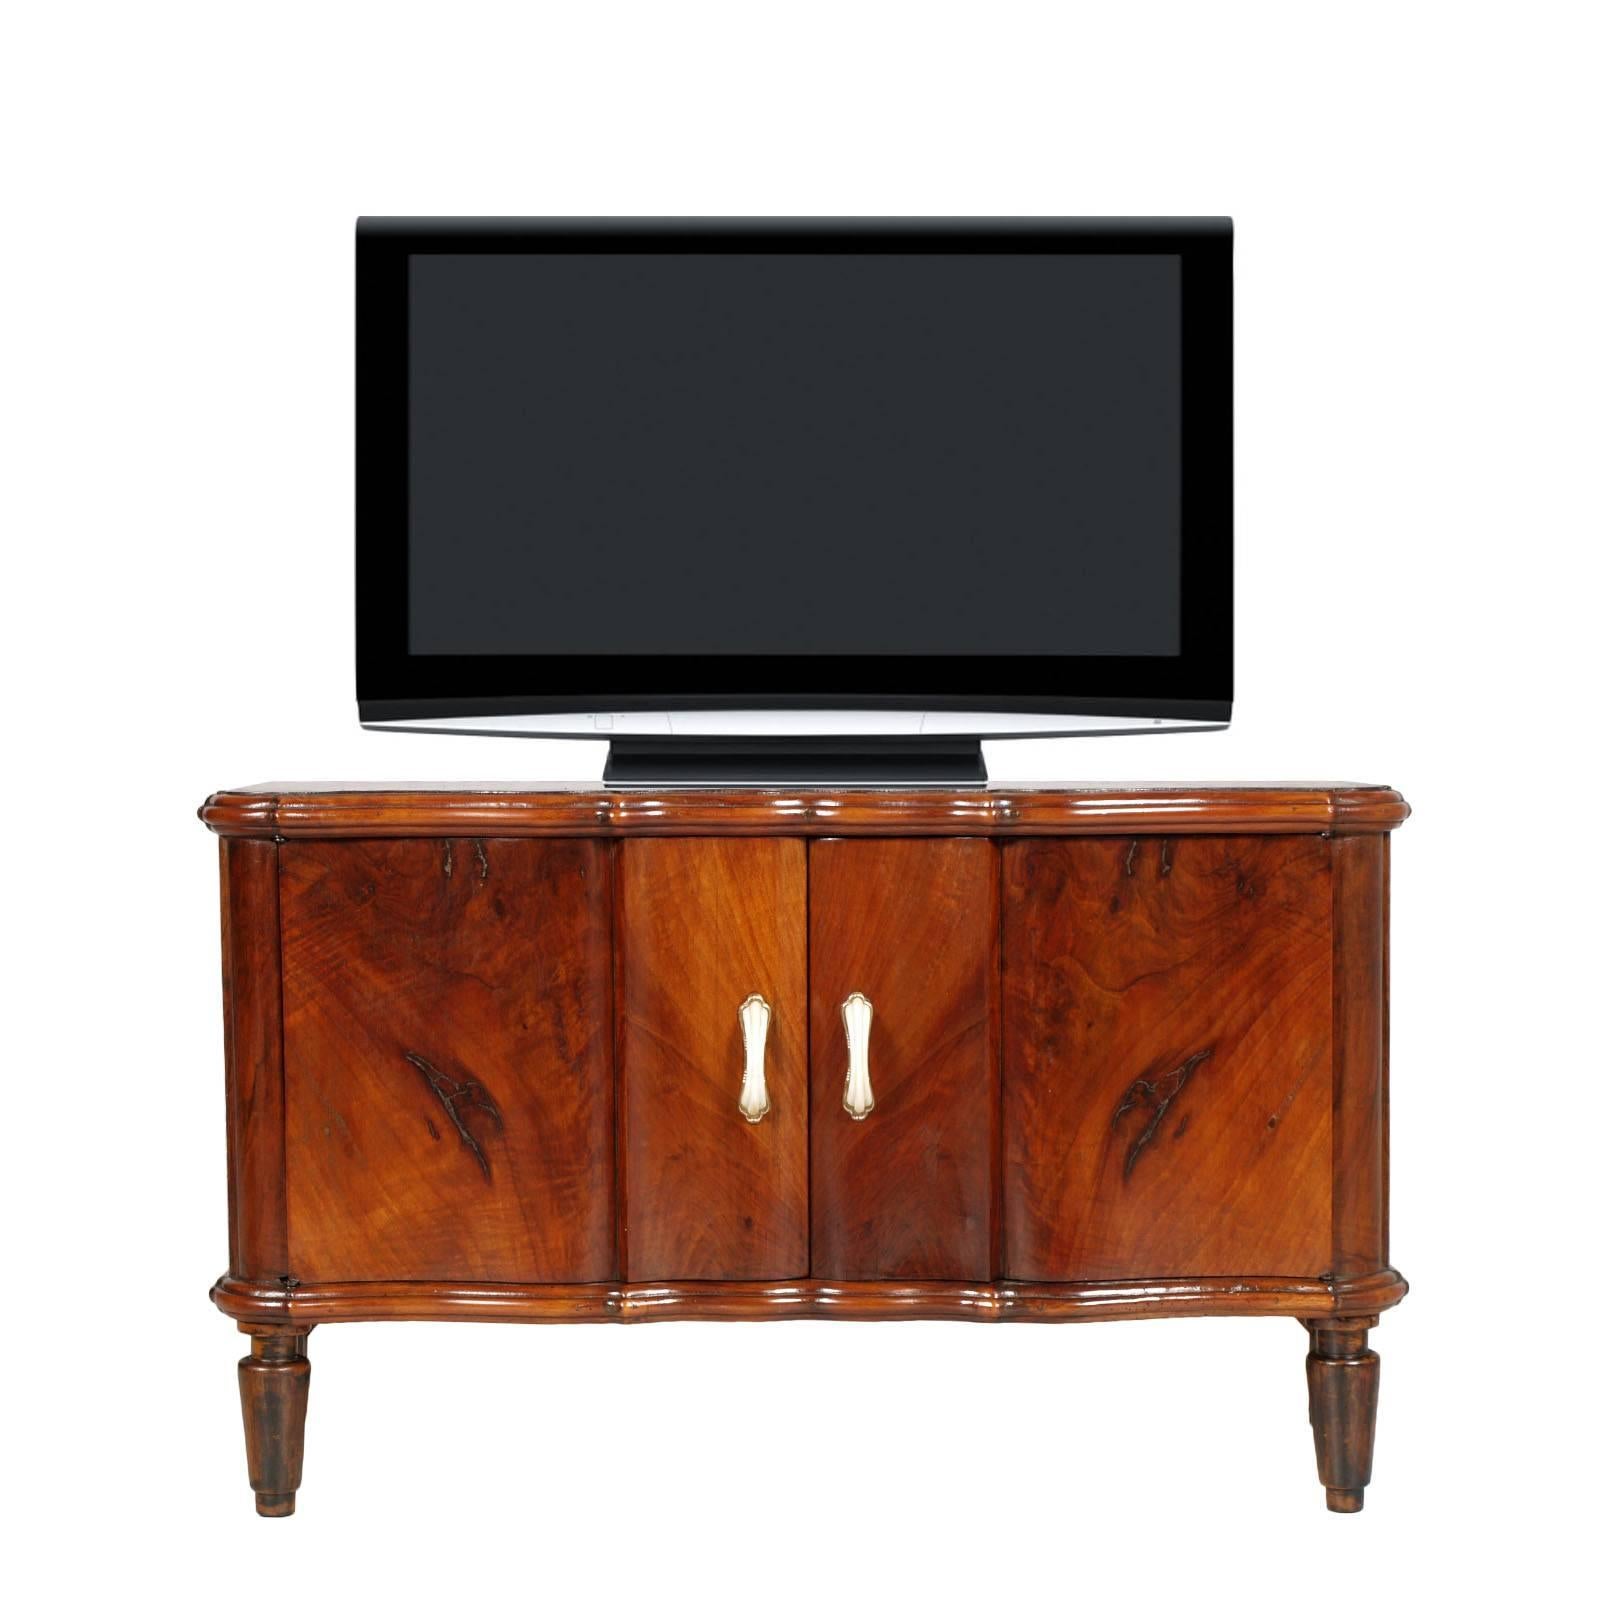 All original console serpentine cabinet Art Deco in burl walnut very suitable as a TV set. 
The furniture has the original bachelite handles of the time; has been restored with final polished with wax

Measure cm: H 58, W 95, D 35.